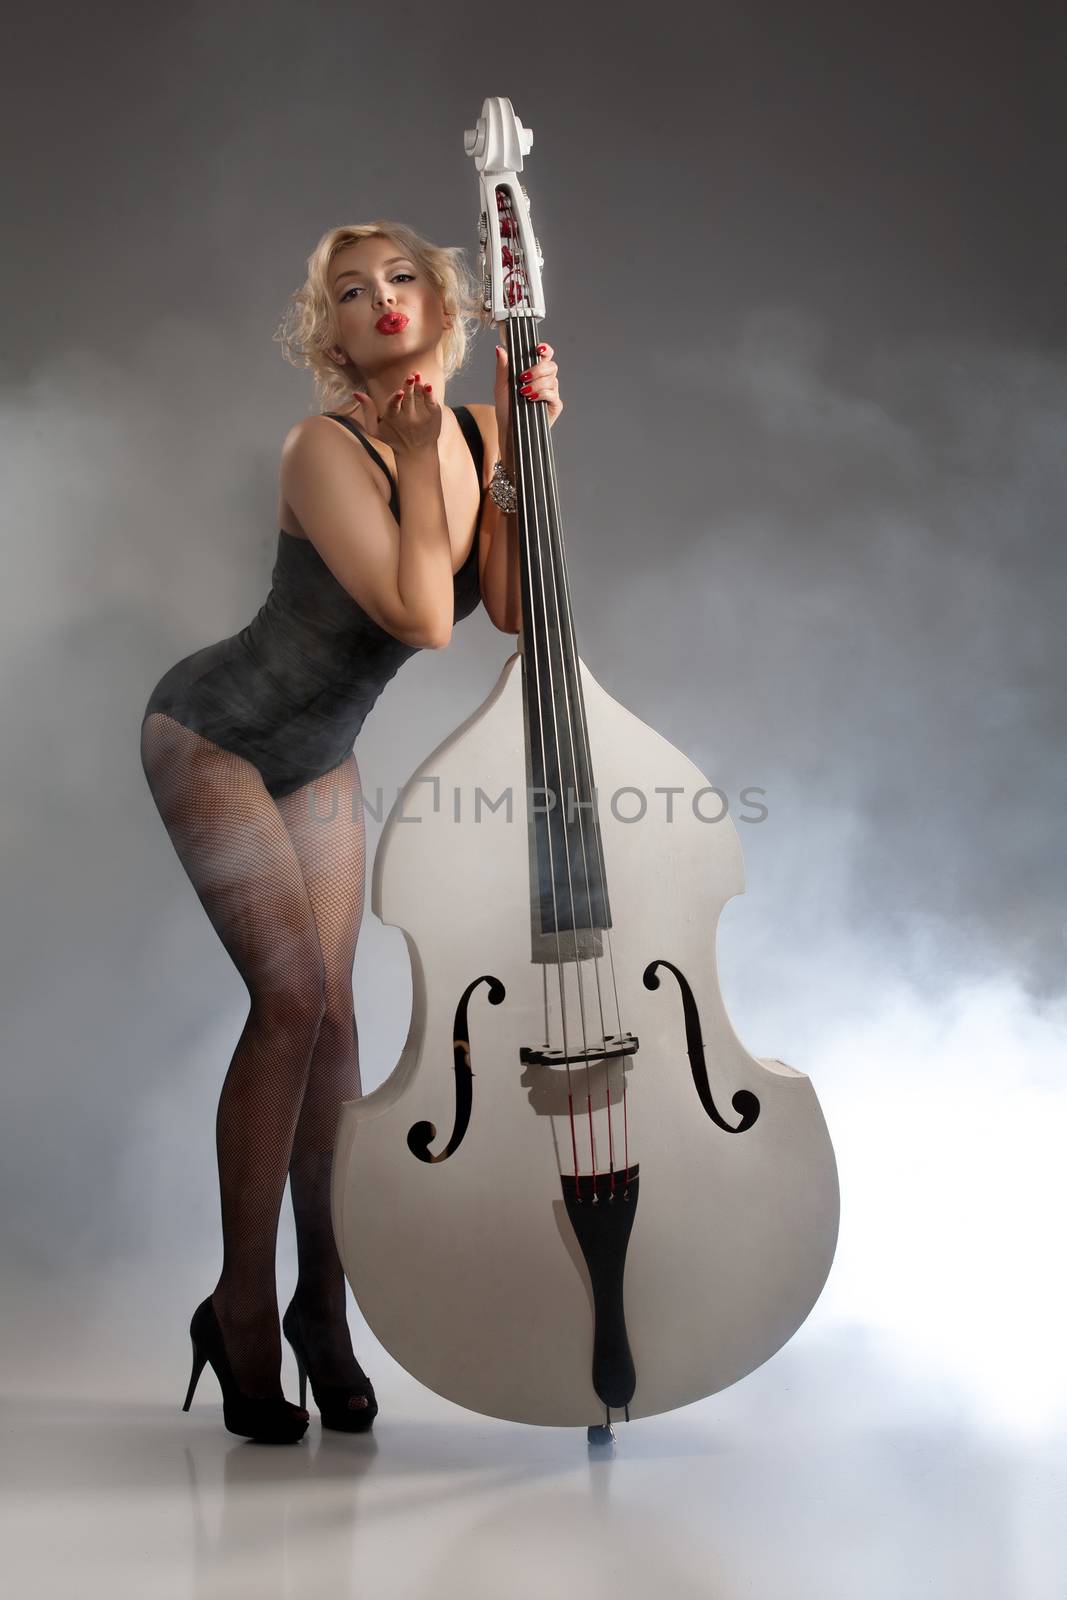 Young Woman In Lingerie With A Double Bass by Fotoskat